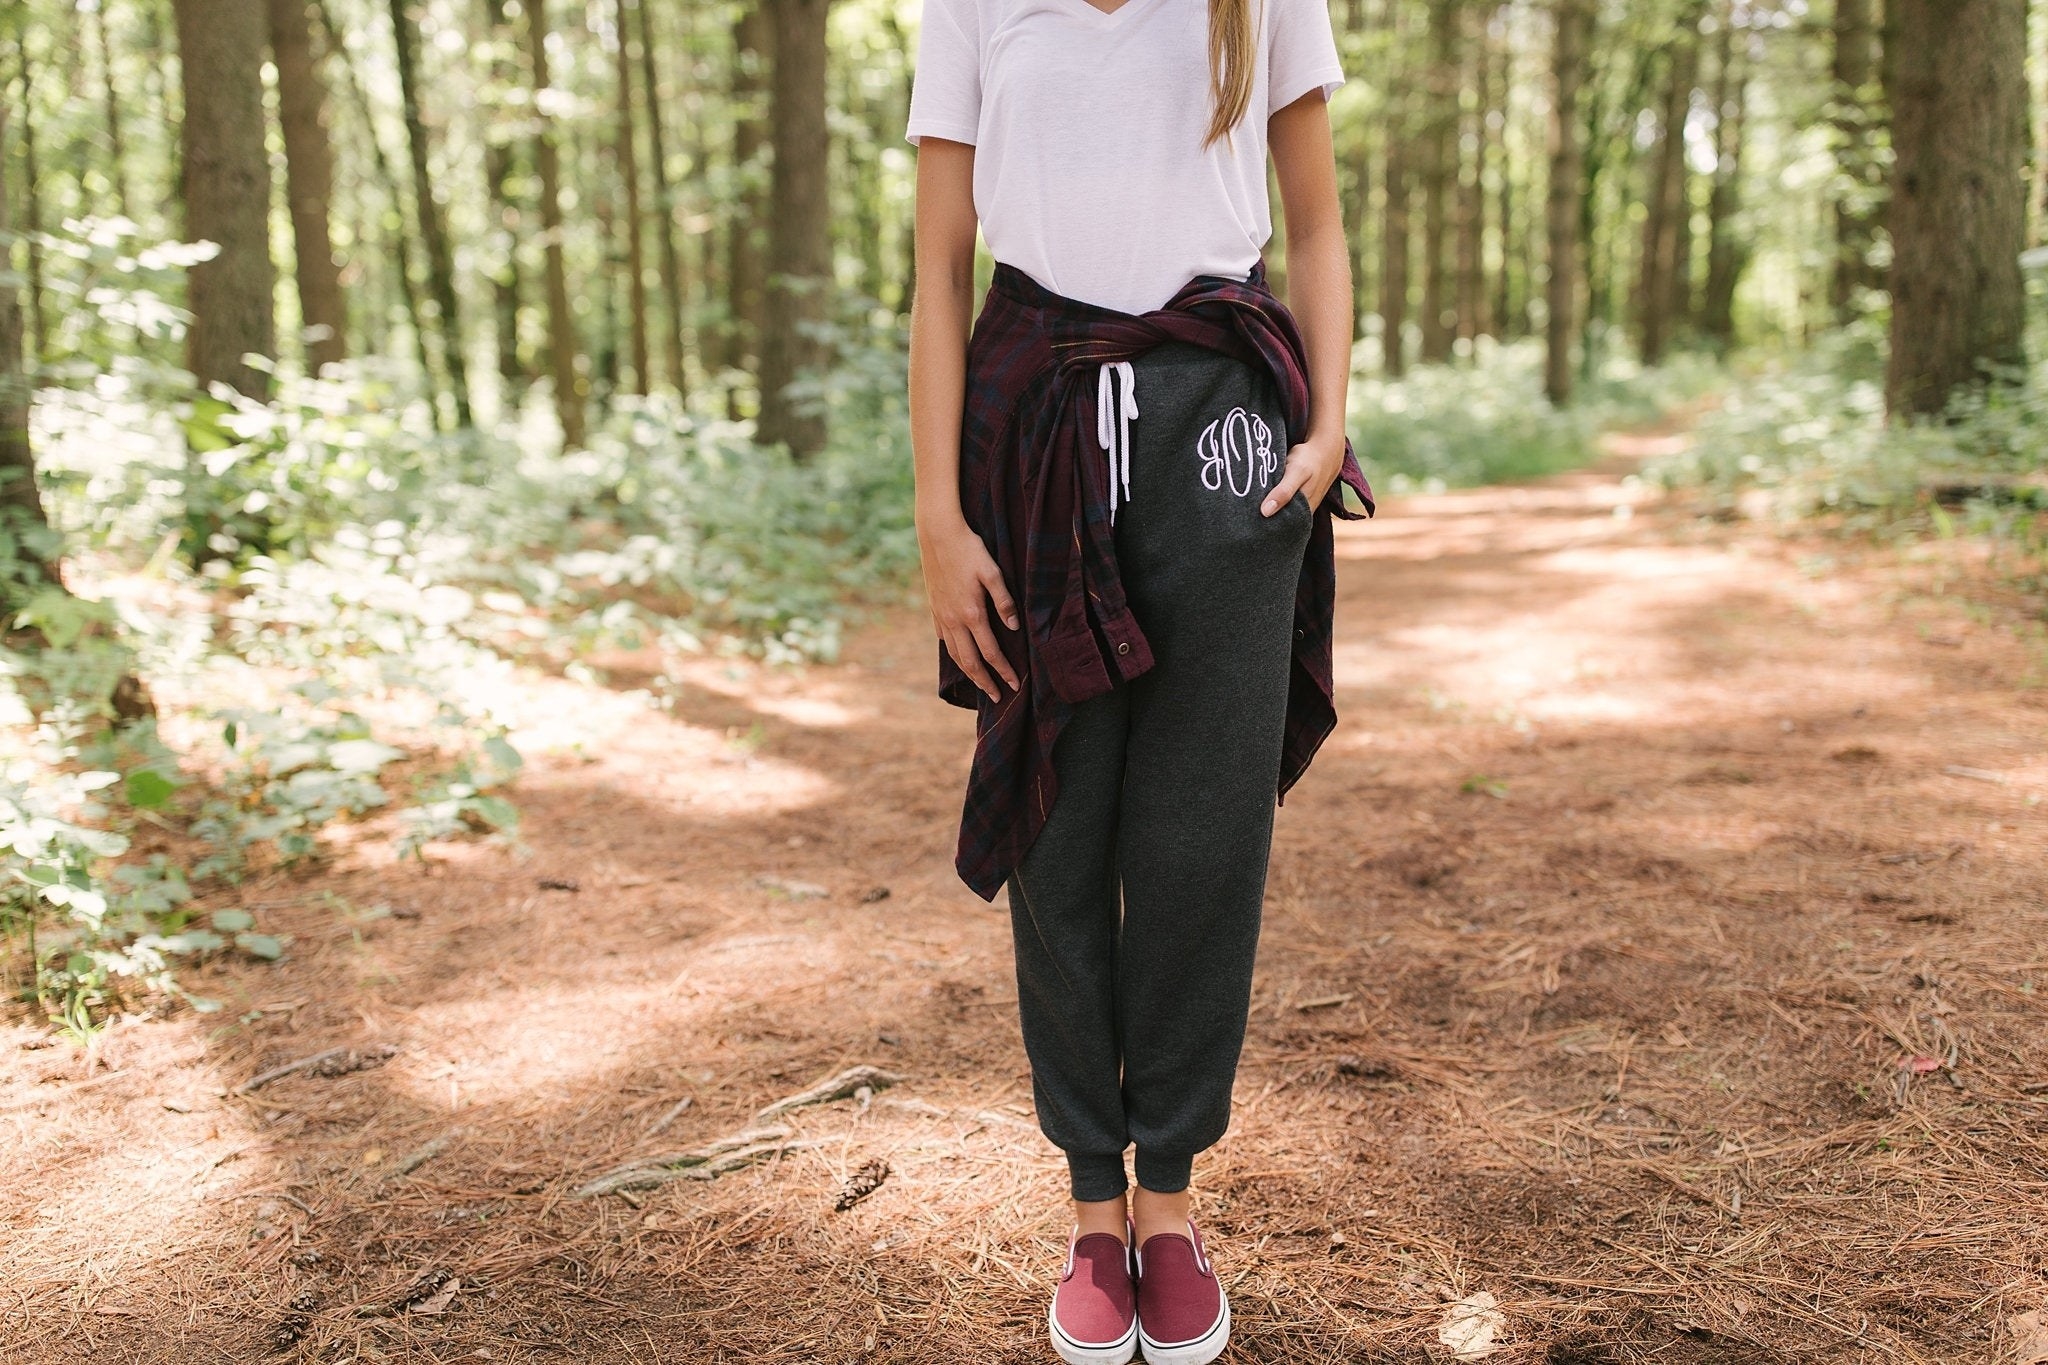 A model standing in the woods wearing the sweatpants with a T-shirt, a button-up shirt wrapped around the waist, and slip-on sneakers